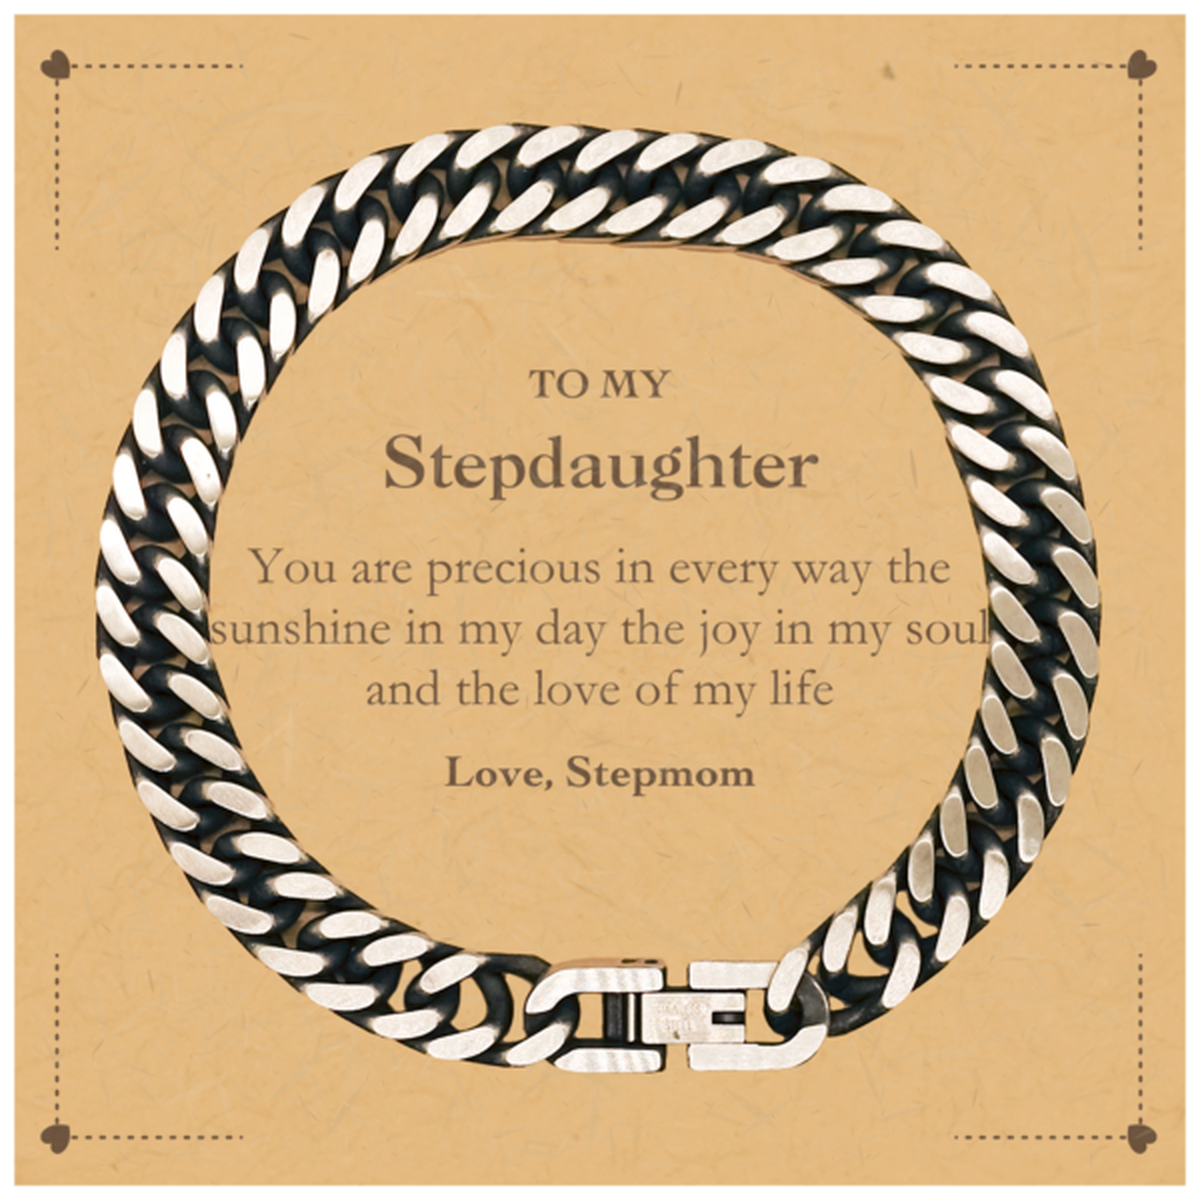 Graduation Gifts for Stepdaughter Cuban Link Chain Bracelet Present from Stepmom, Christmas Stepdaughter Birthday Gifts Stepdaughter You are precious in every way the sunshine in my day. Love, Stepmom